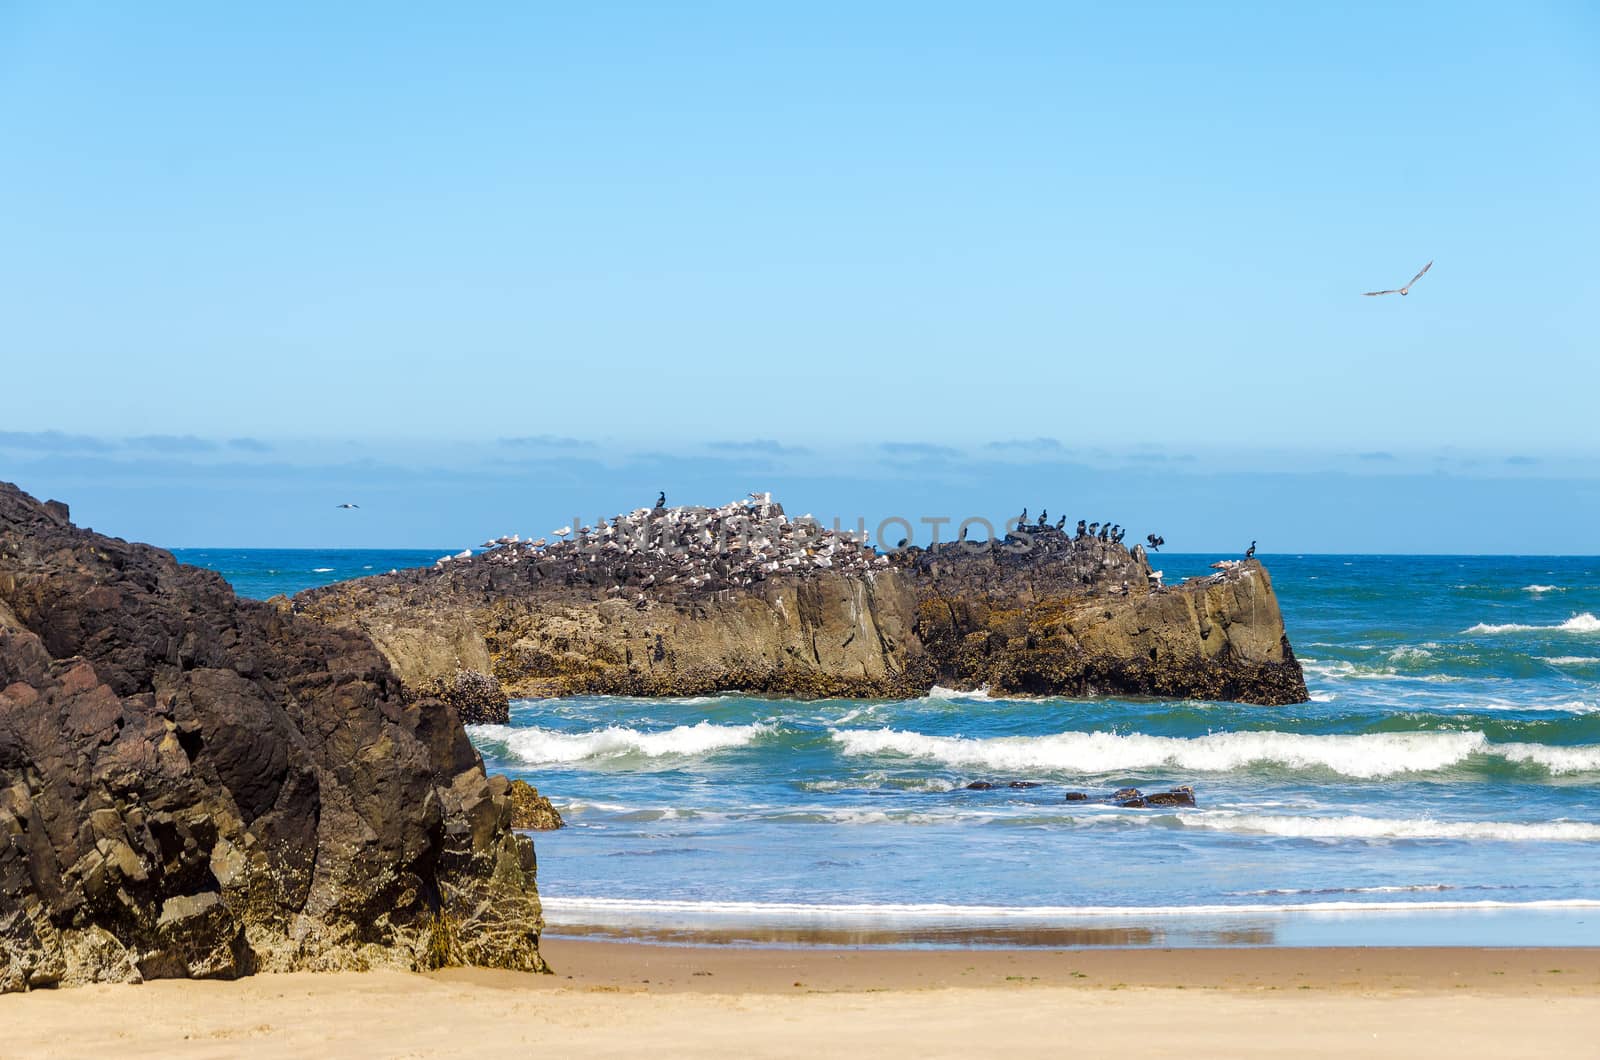 Rocky outcrop at the Oregon coast with hundreds of seabirds on it